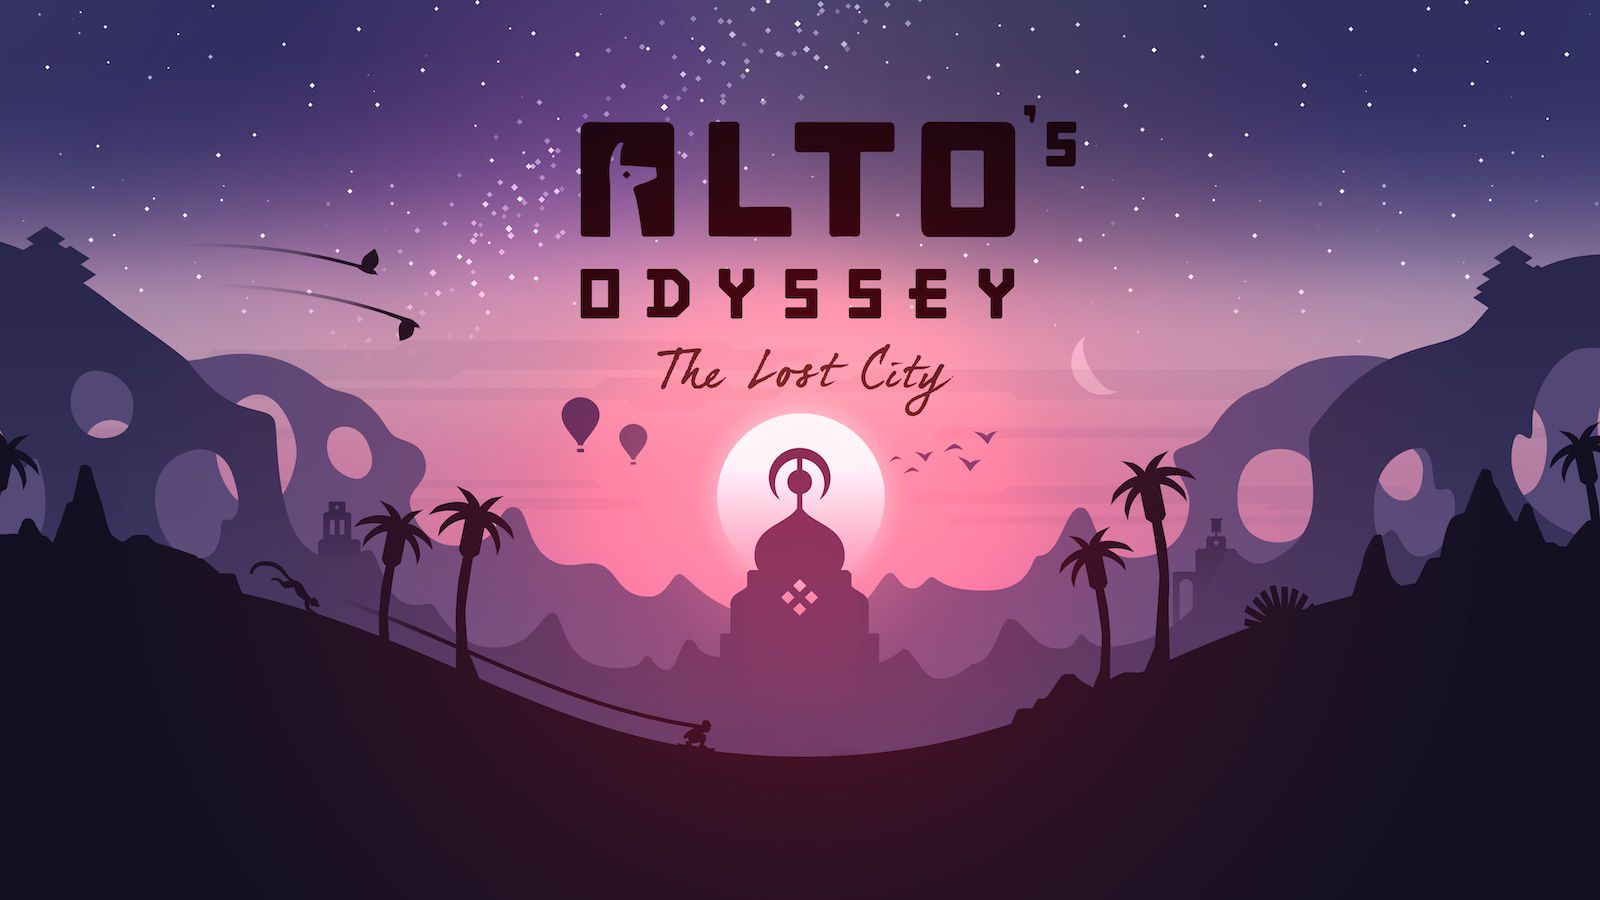 an image of alto's odyssey